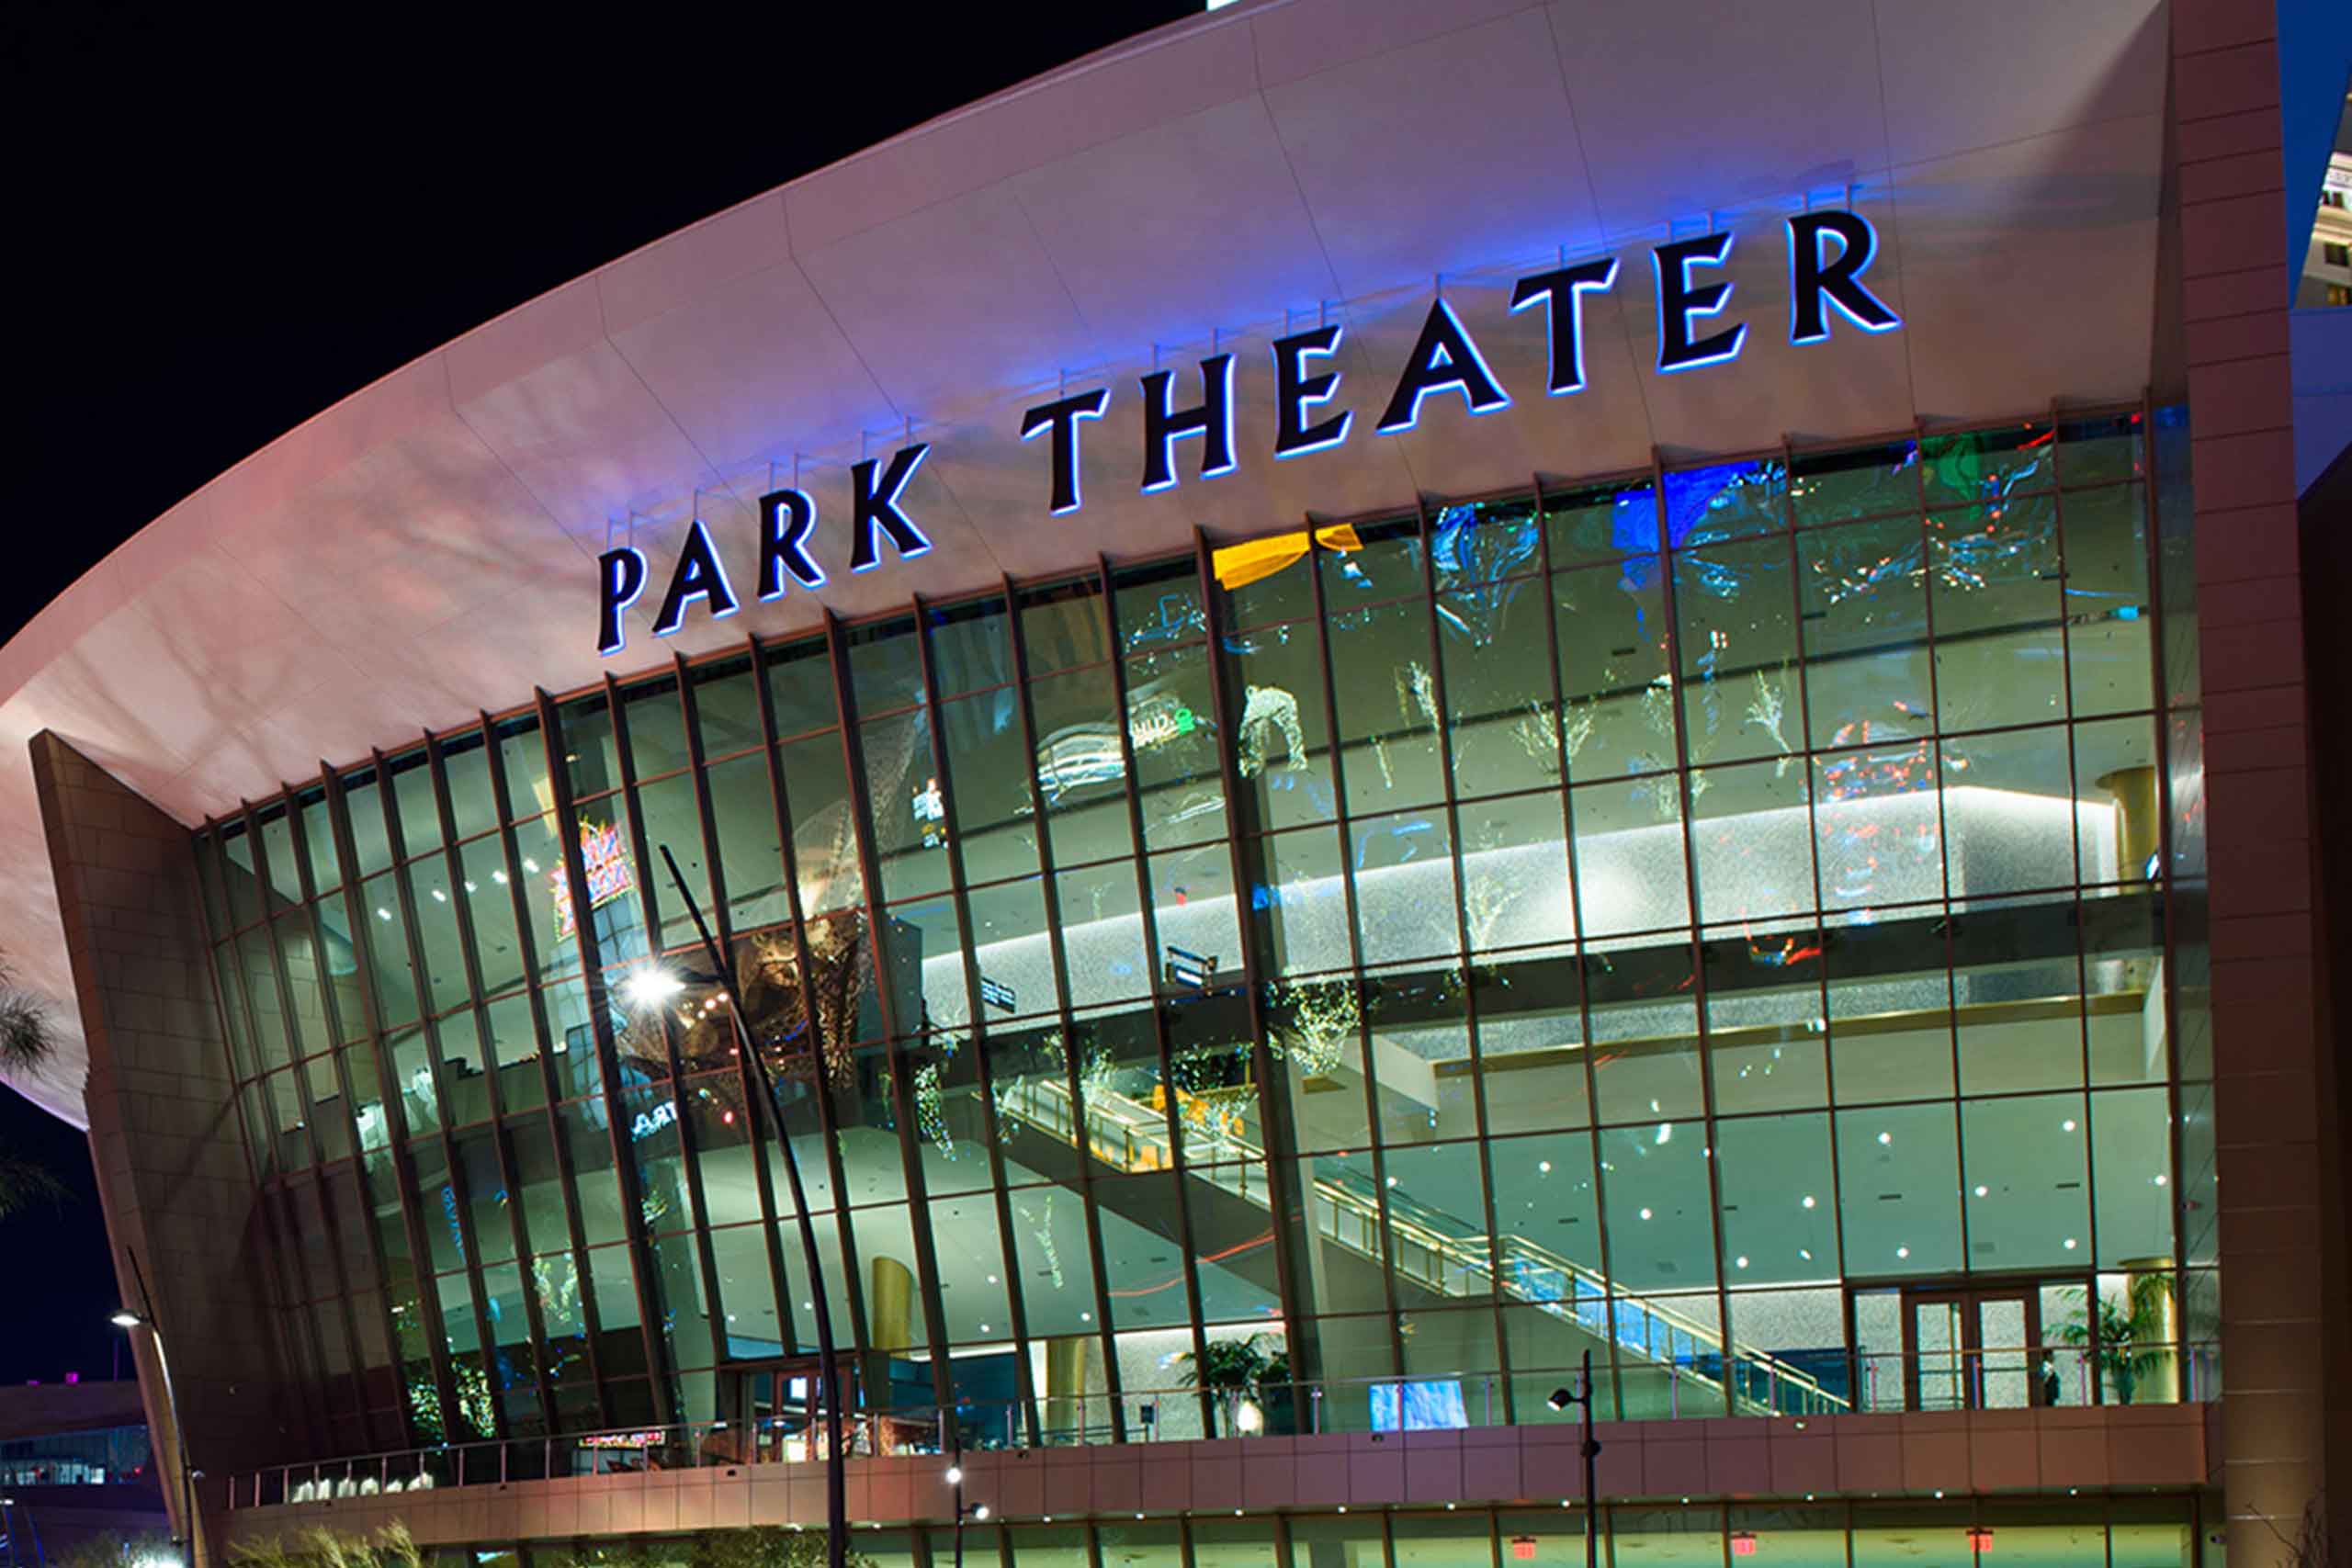 ufc and boxing events in park theater las vegas